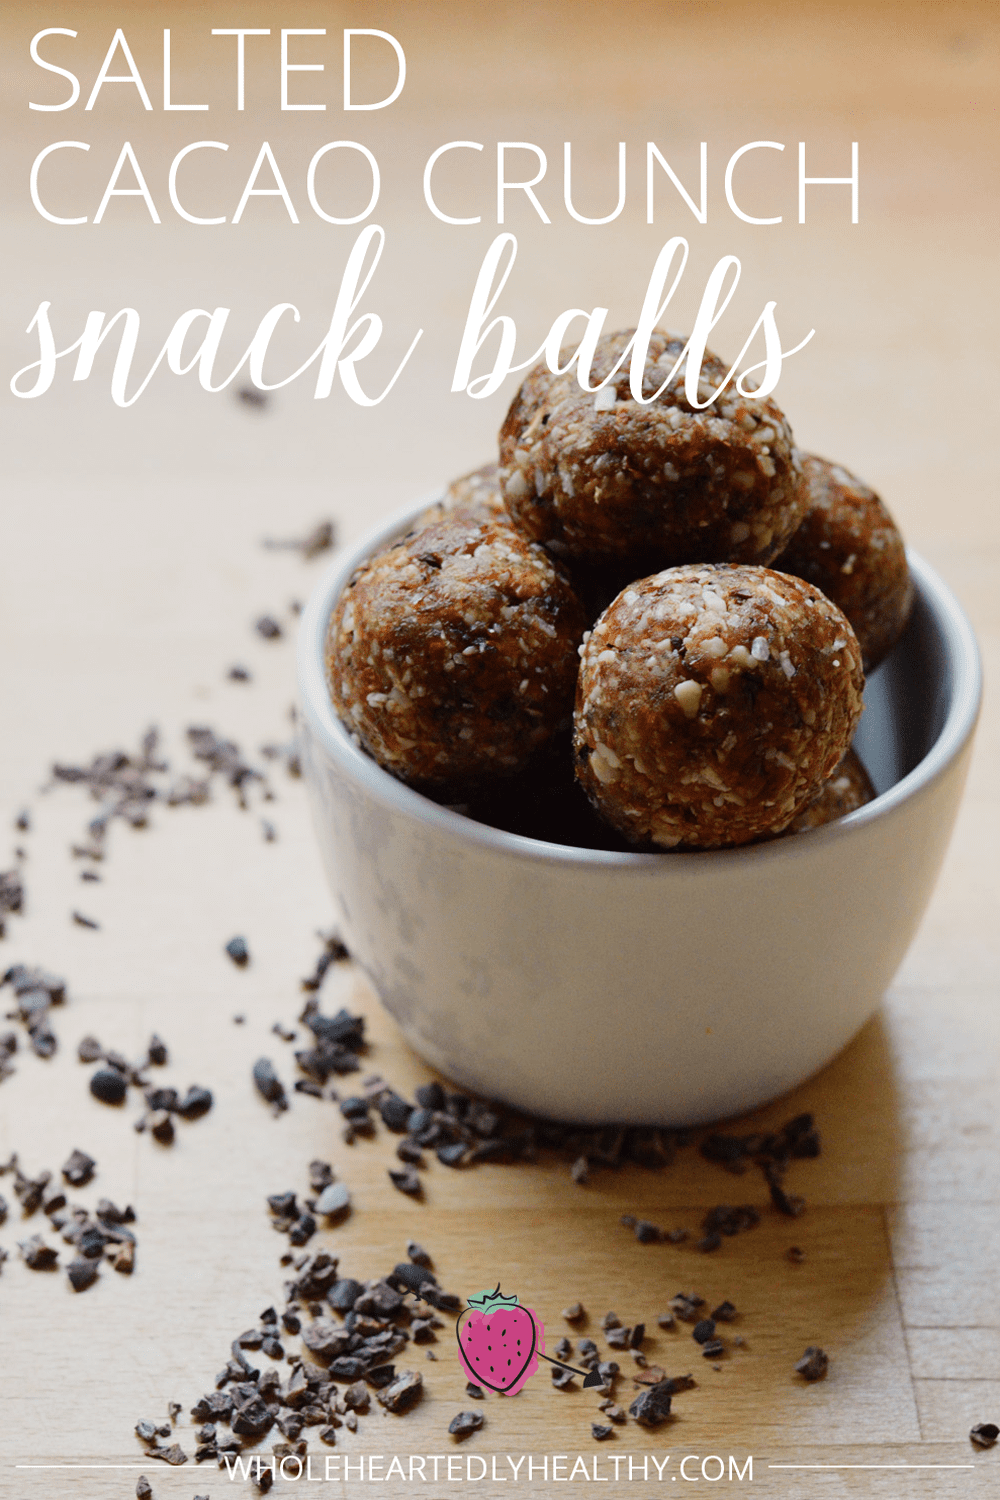 Salted cacao crunch snack balls